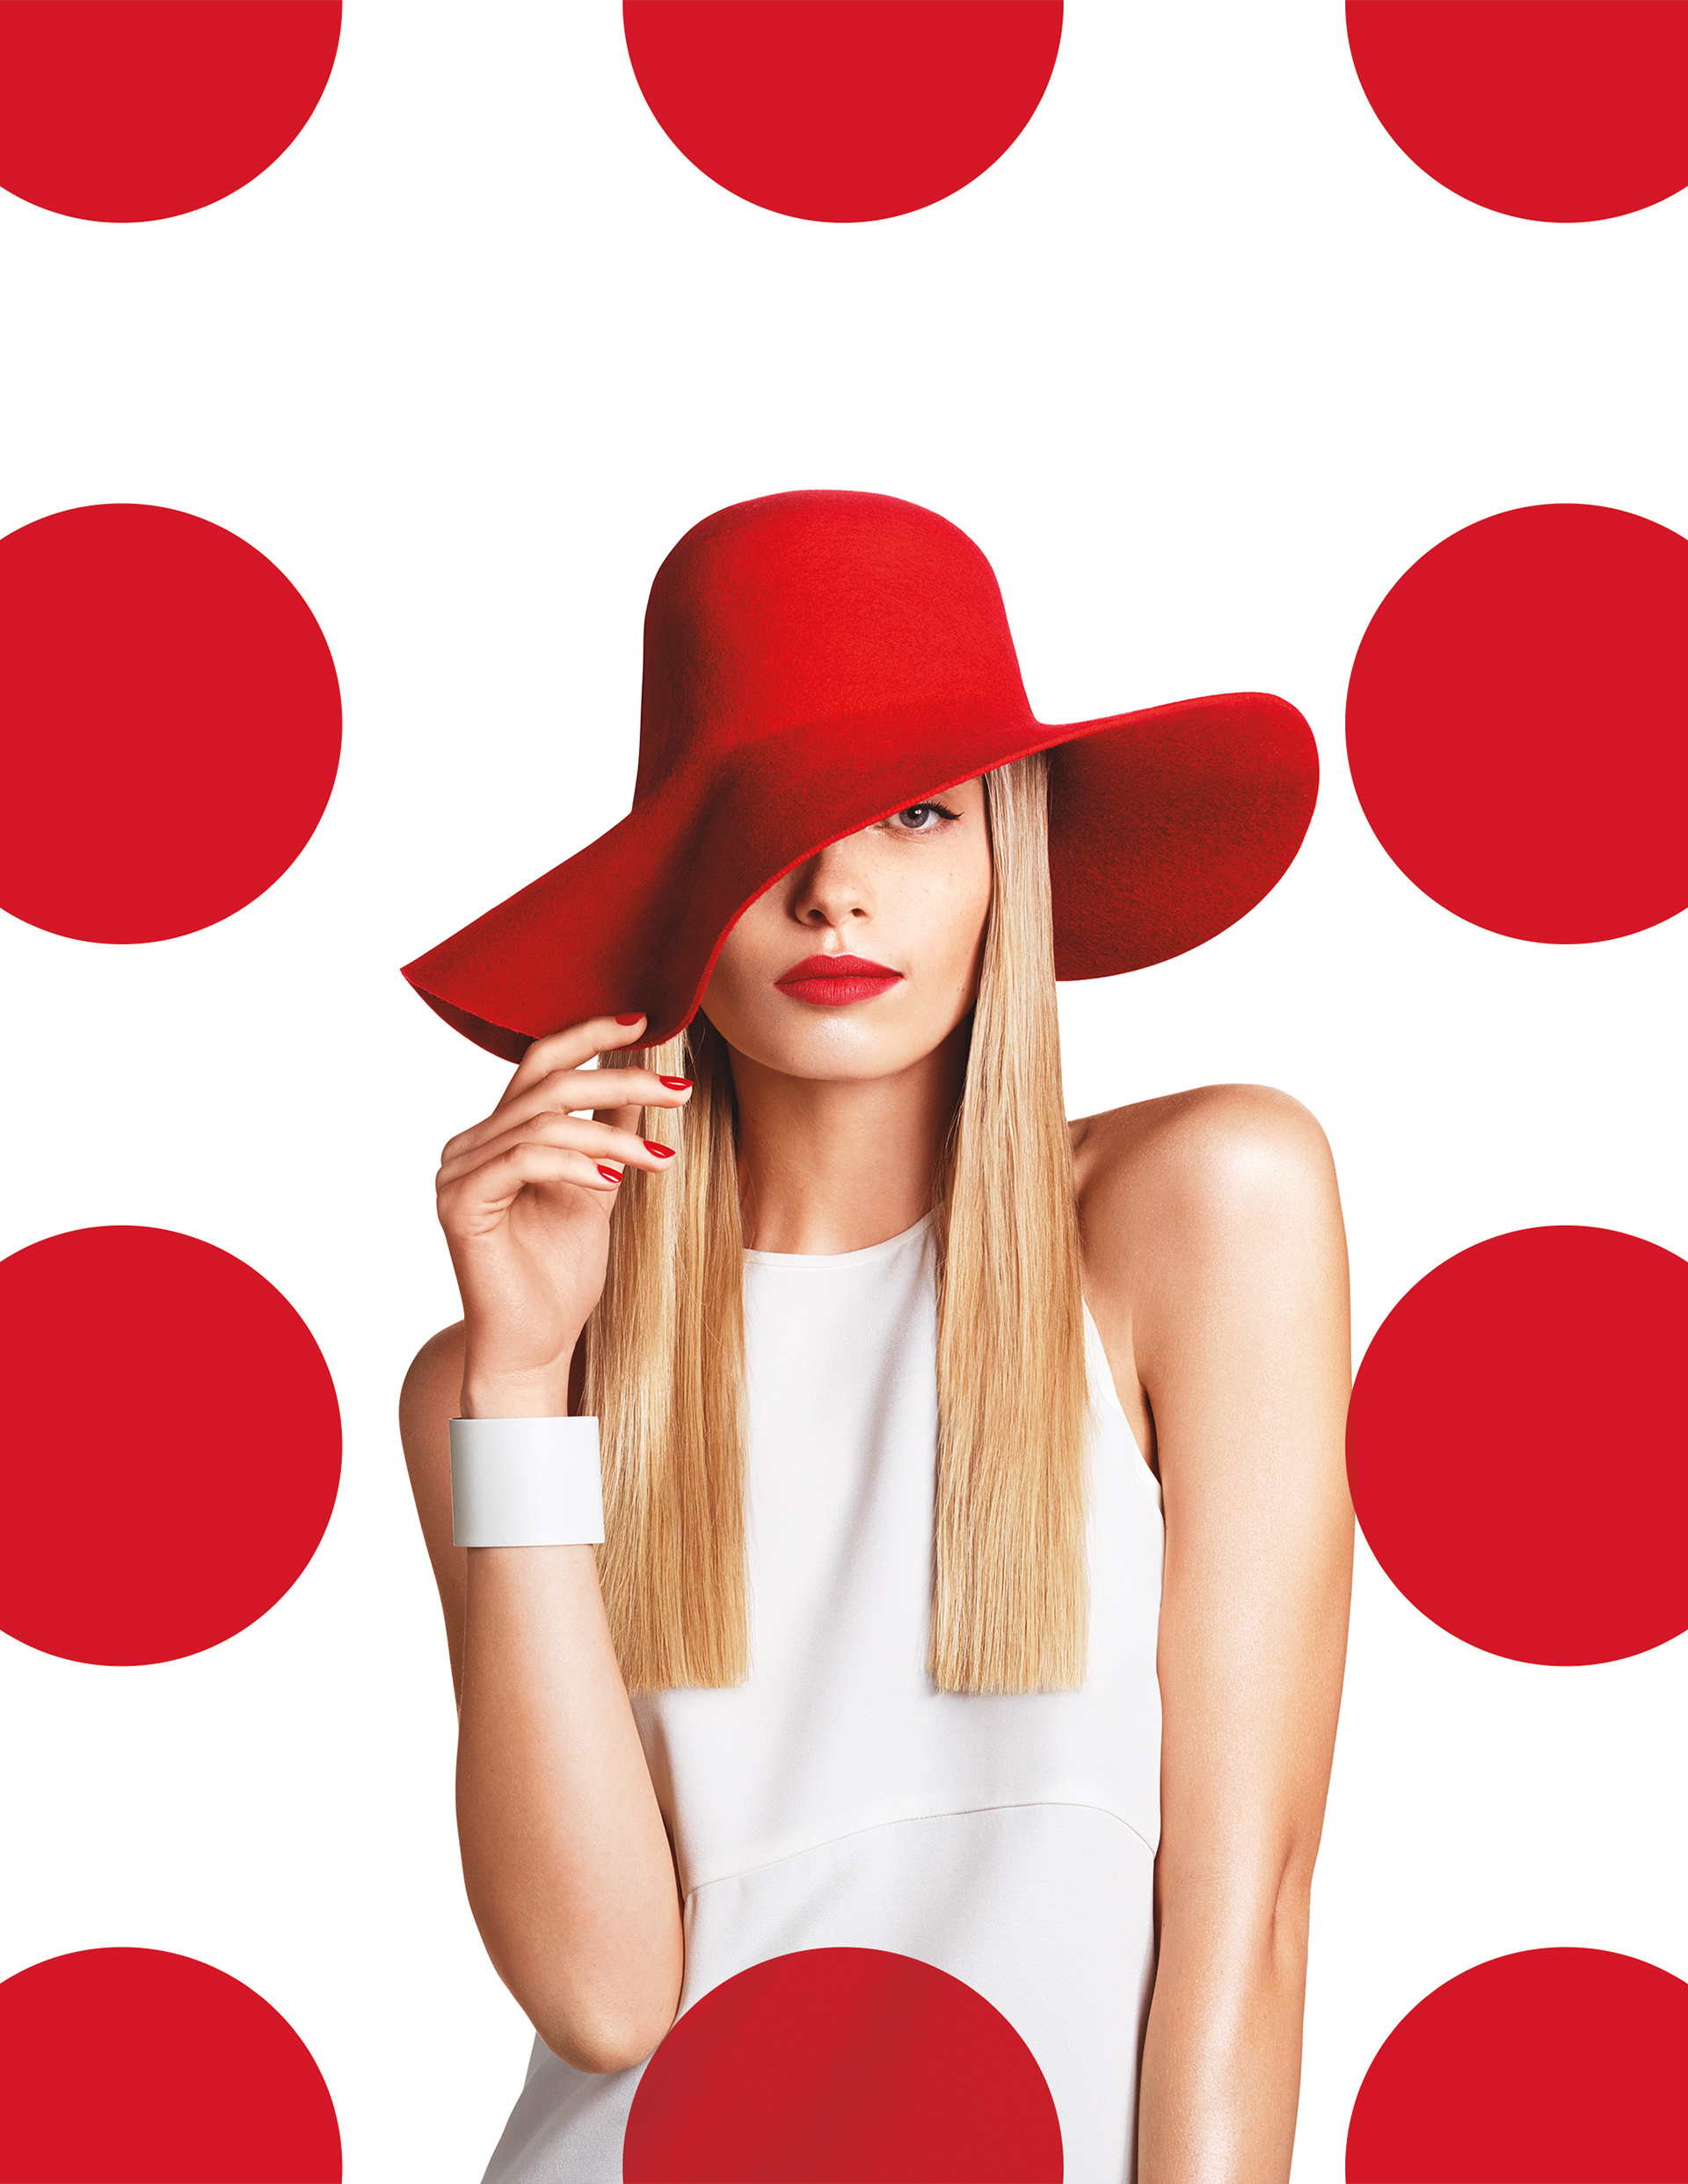 custom-imagery-photo-target-red-hat-and-dots-01.jpg